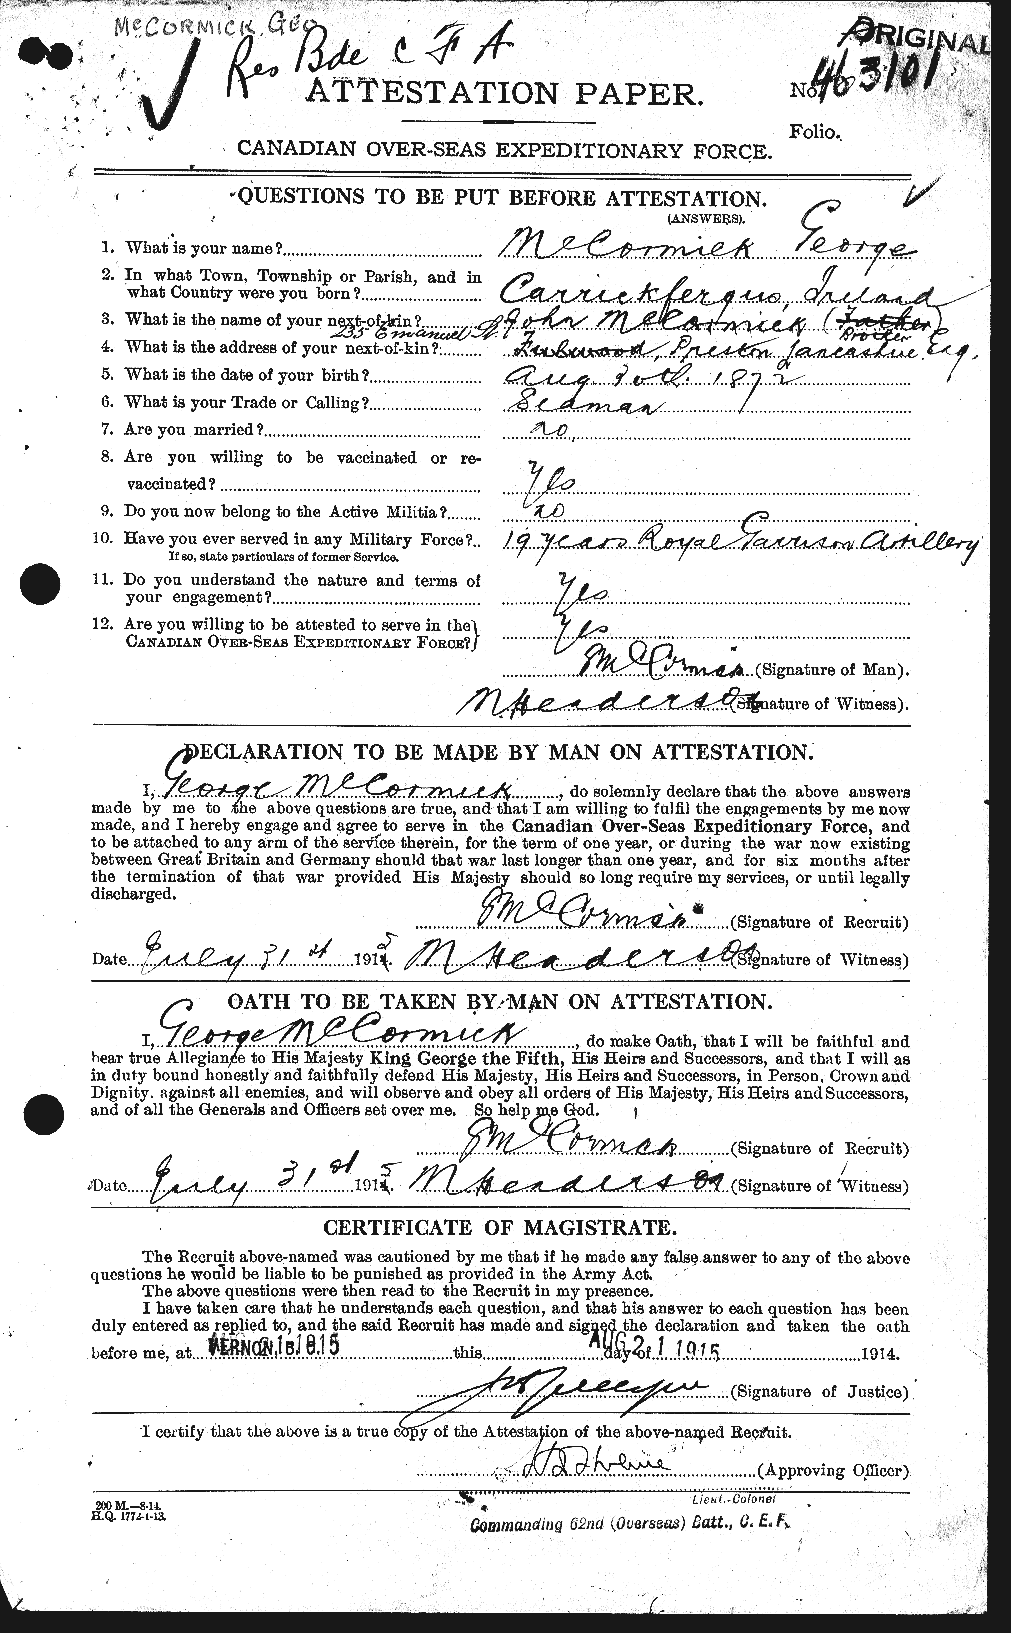 Personnel Records of the First World War - CEF 133752a